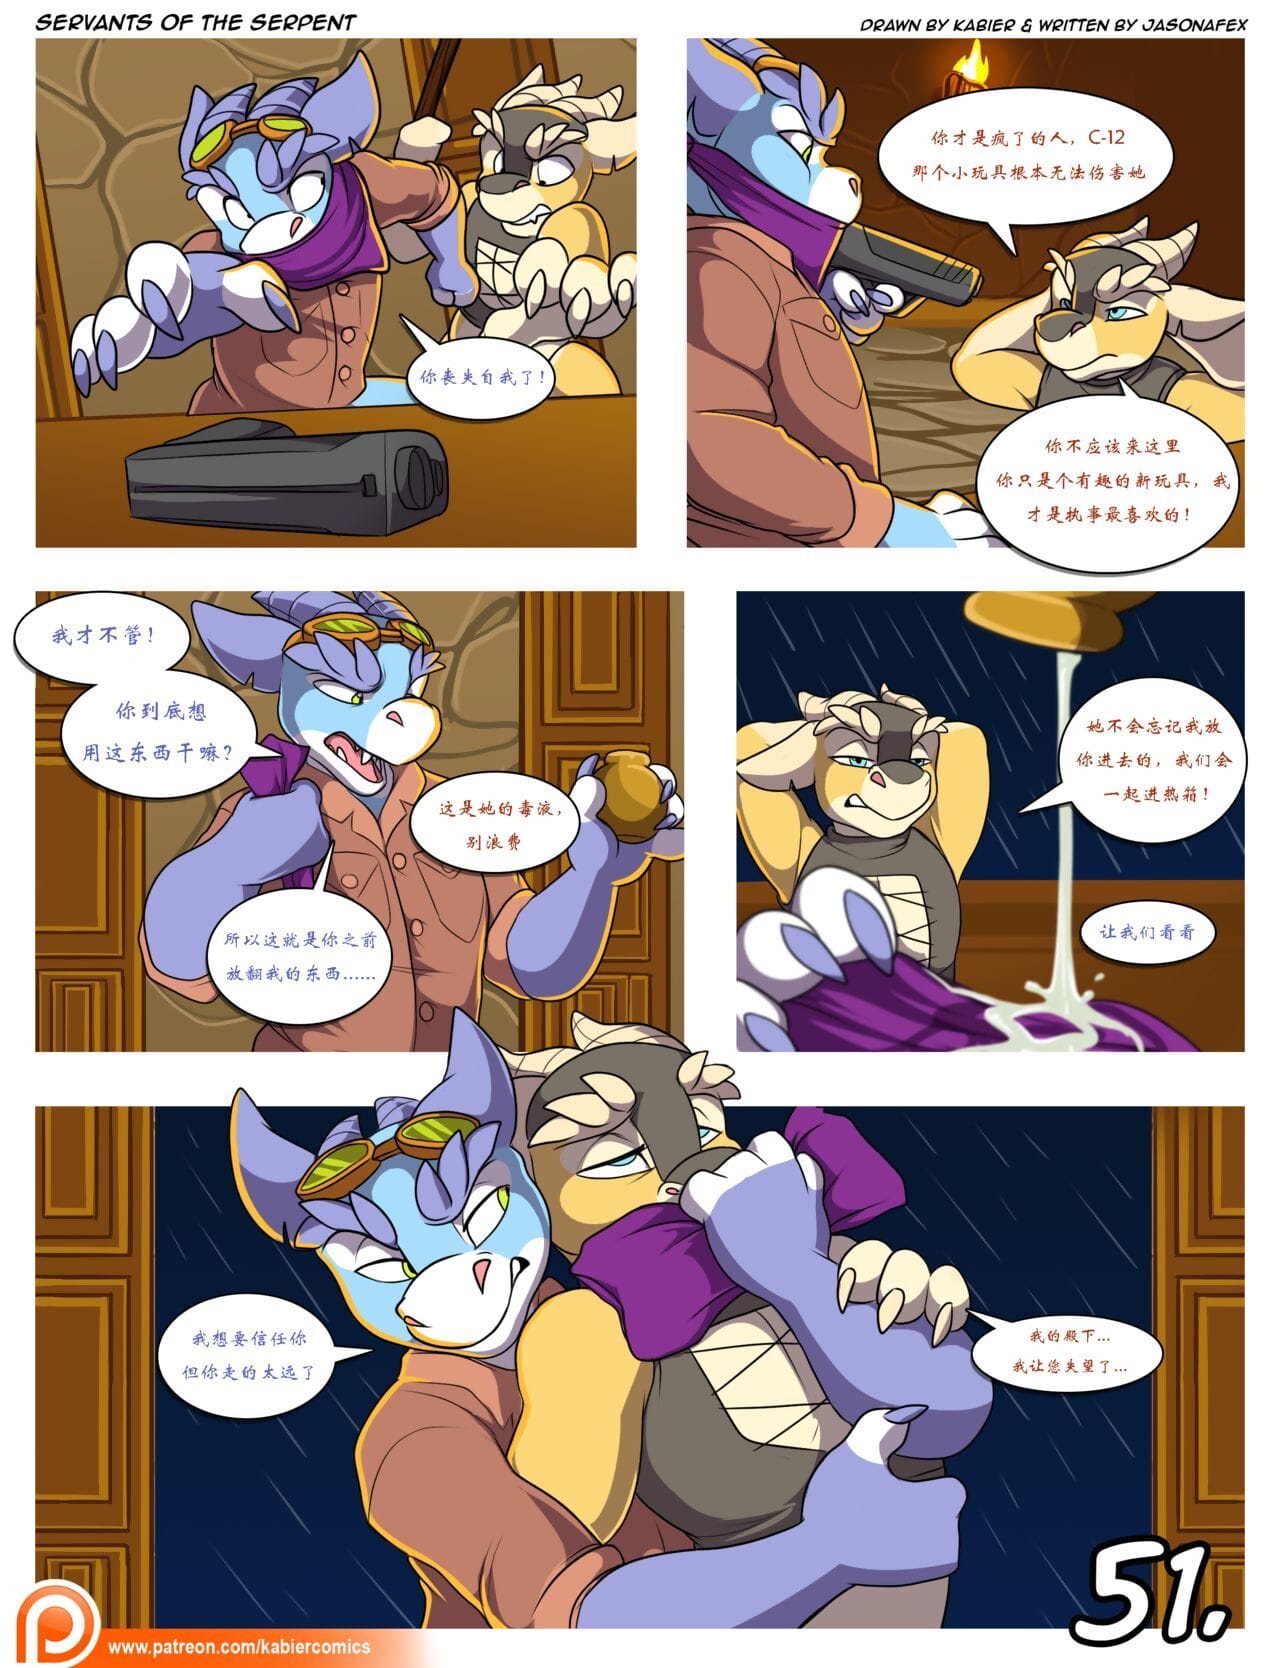 Servants of the Serpent - part 3 page 1